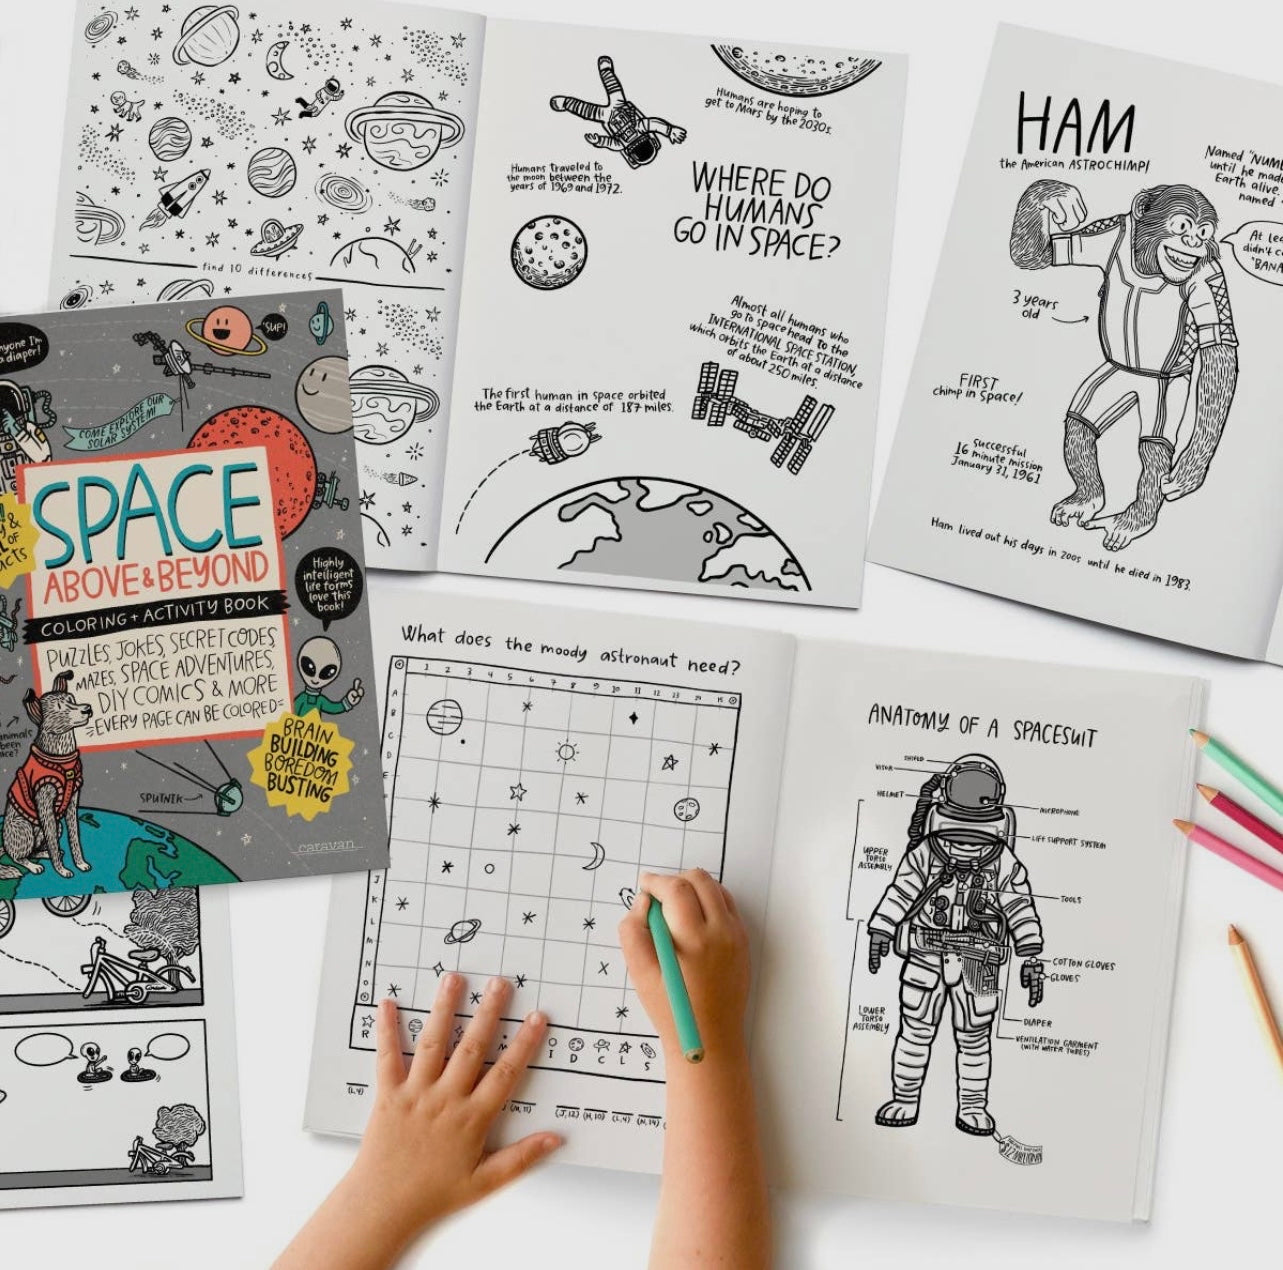 Space Coloring + Activity Book: Mazes, Activities, Jokes, DIY, and More!